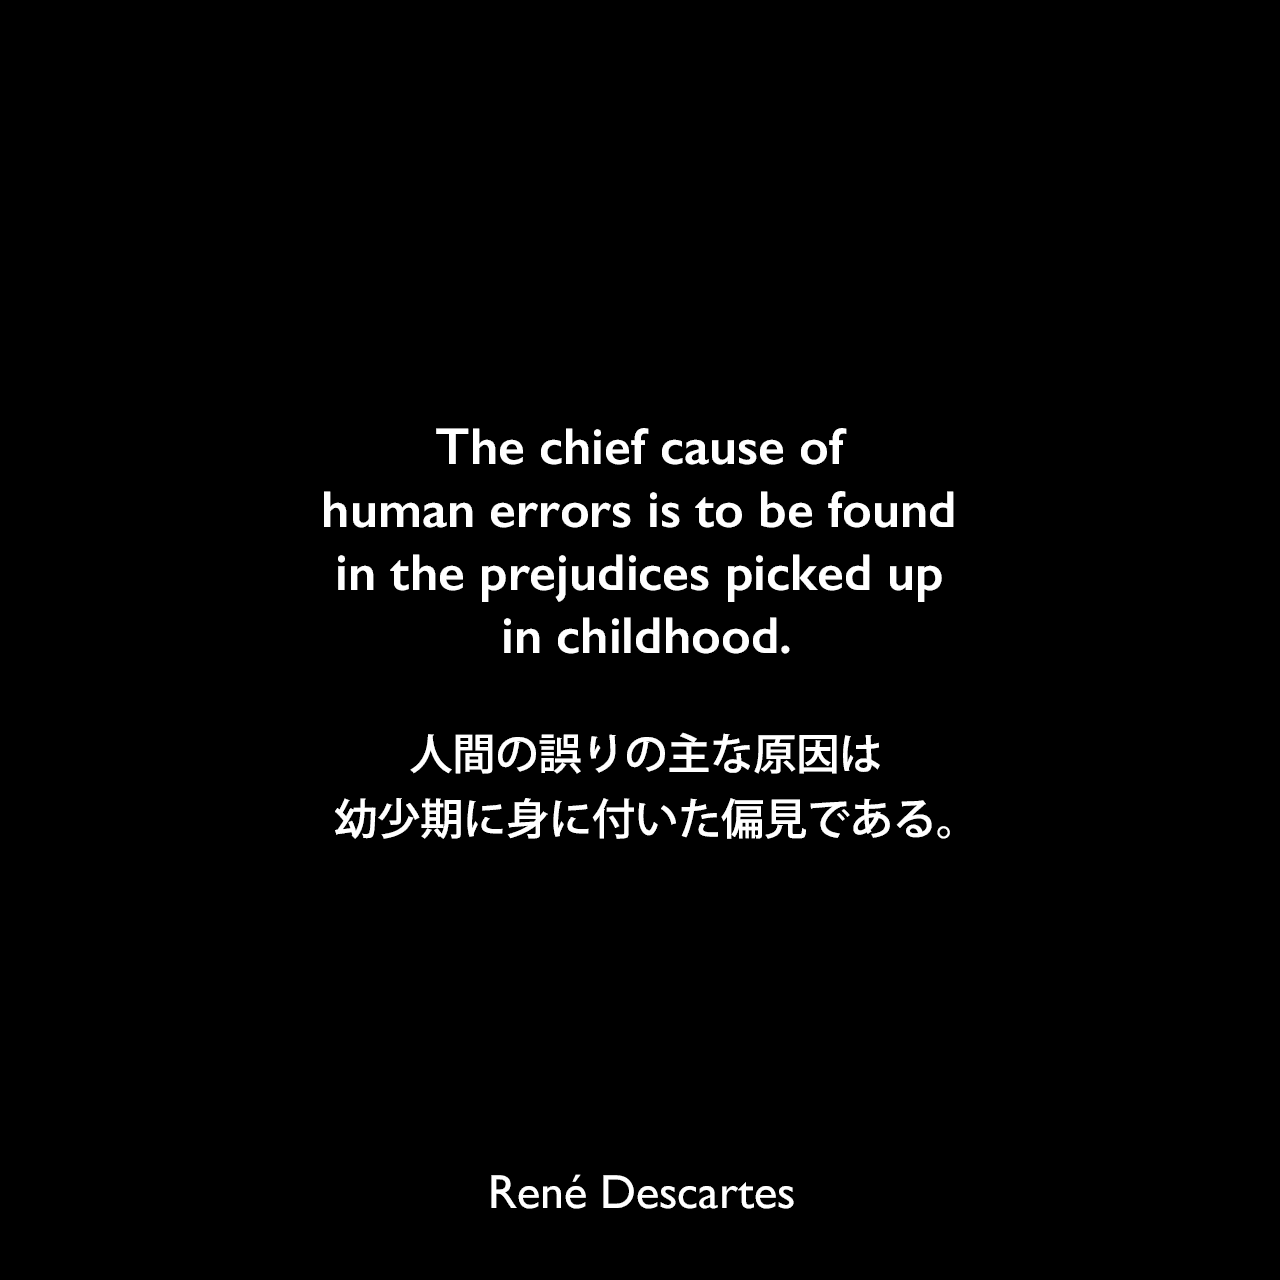 The chief cause of human errors is to be found in the prejudices picked up in childhood.人間の誤りの主な原因は、幼少期に身に付いた偏見である。René Descartes